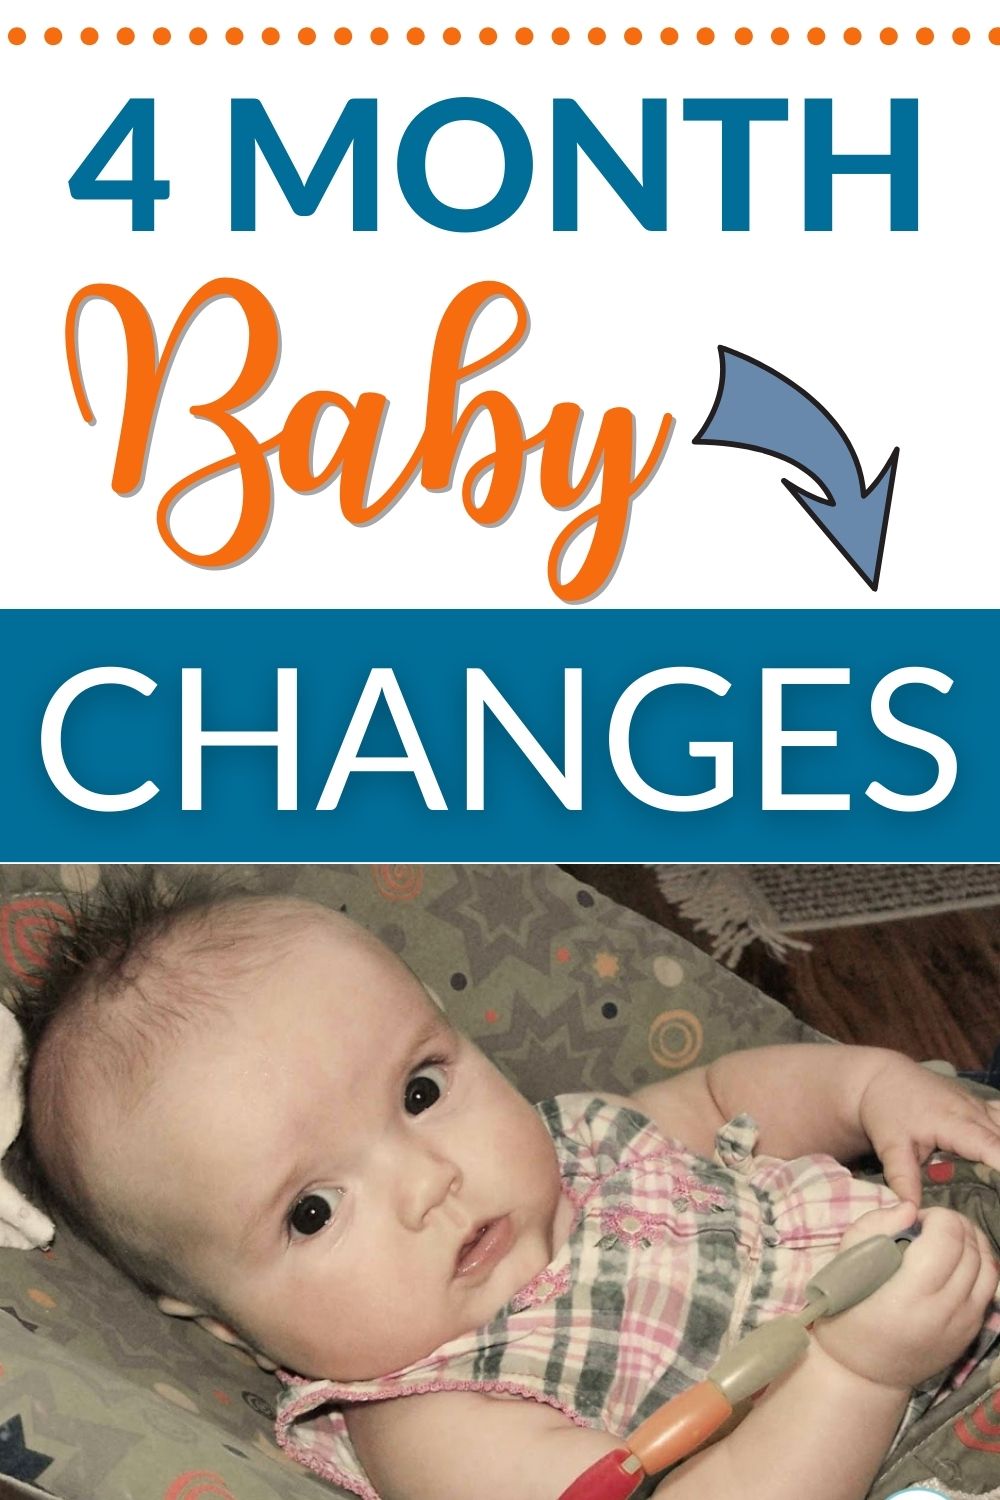 4 Month Old Changes for Your Baby - Babywise Mom